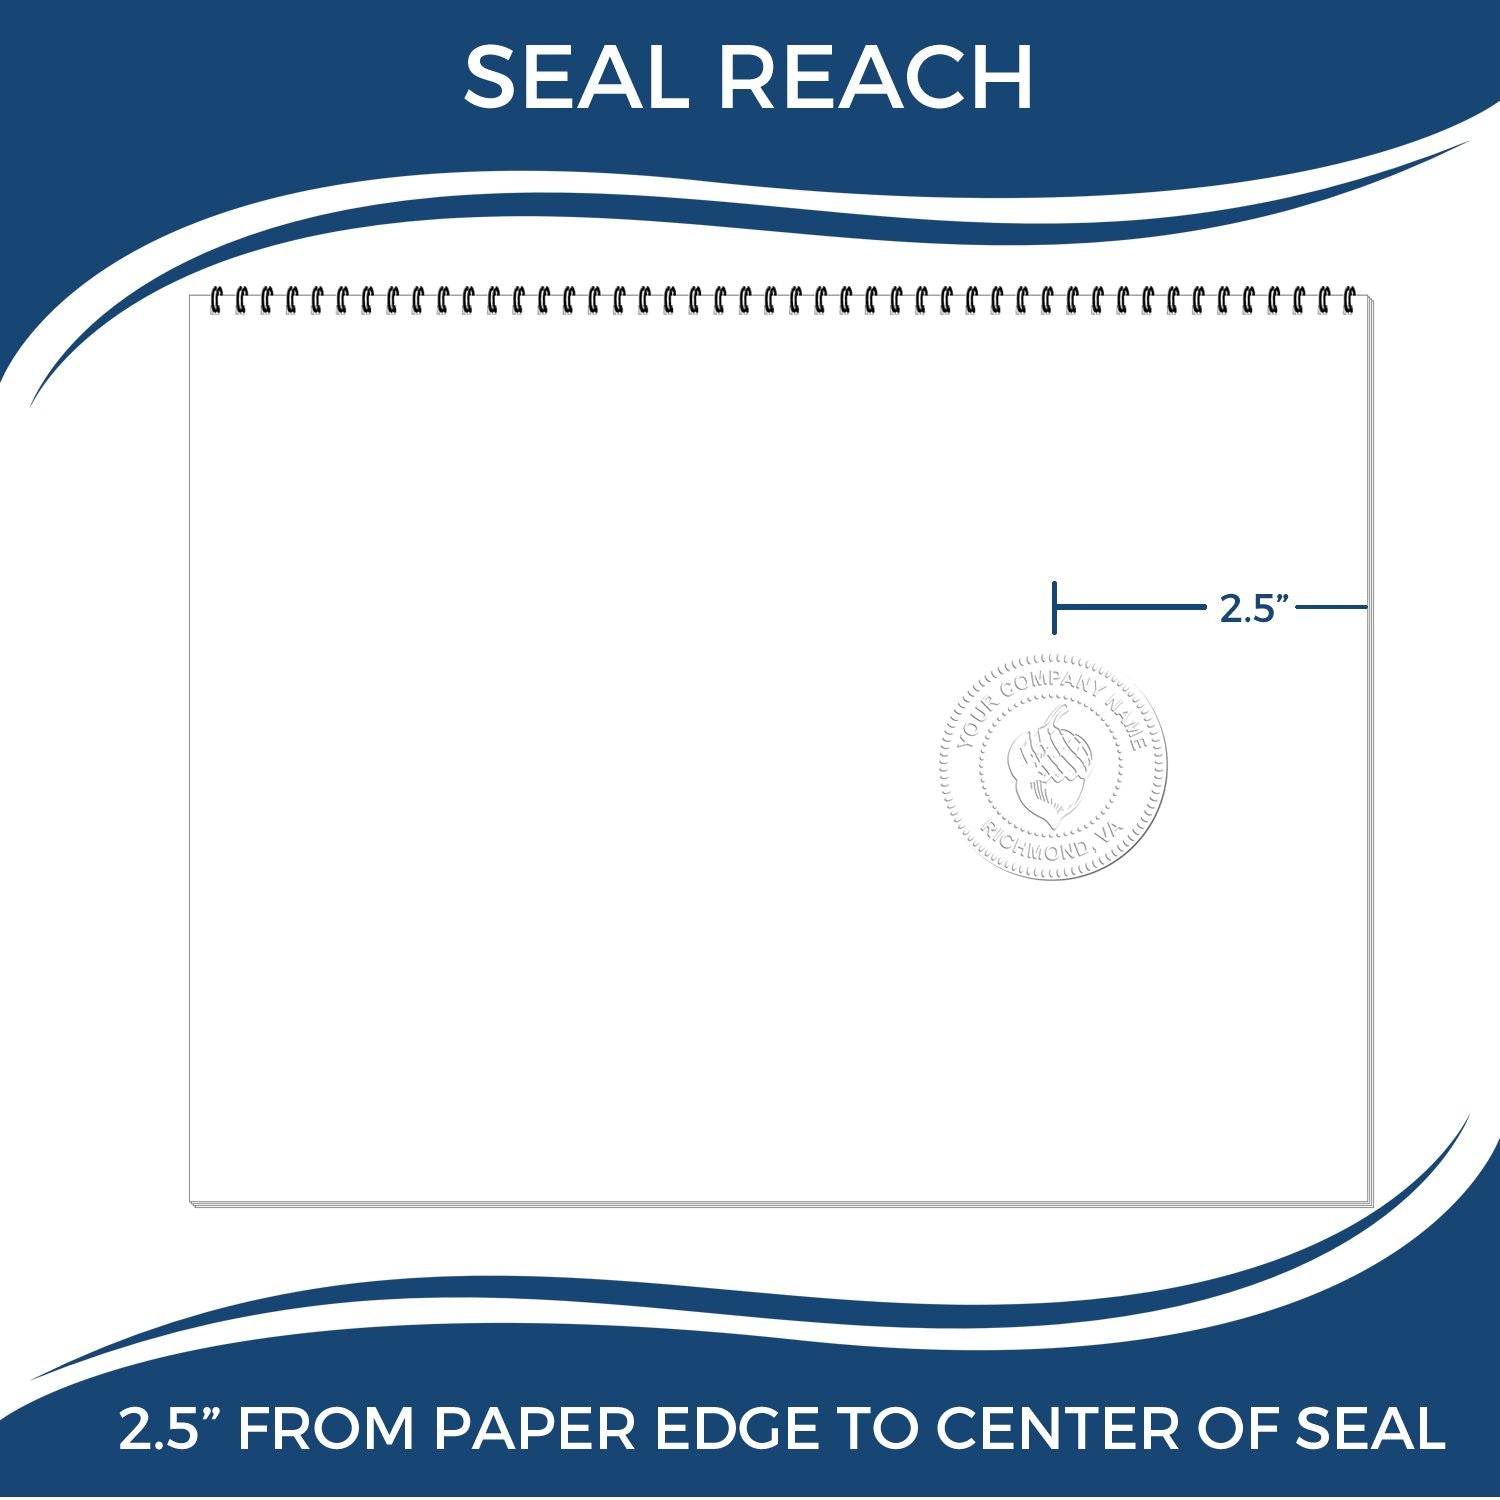 An infographic showing the seal reach which is represented by a ruler and a miniature seal image of the Long Reach Mississippi Geology Seal